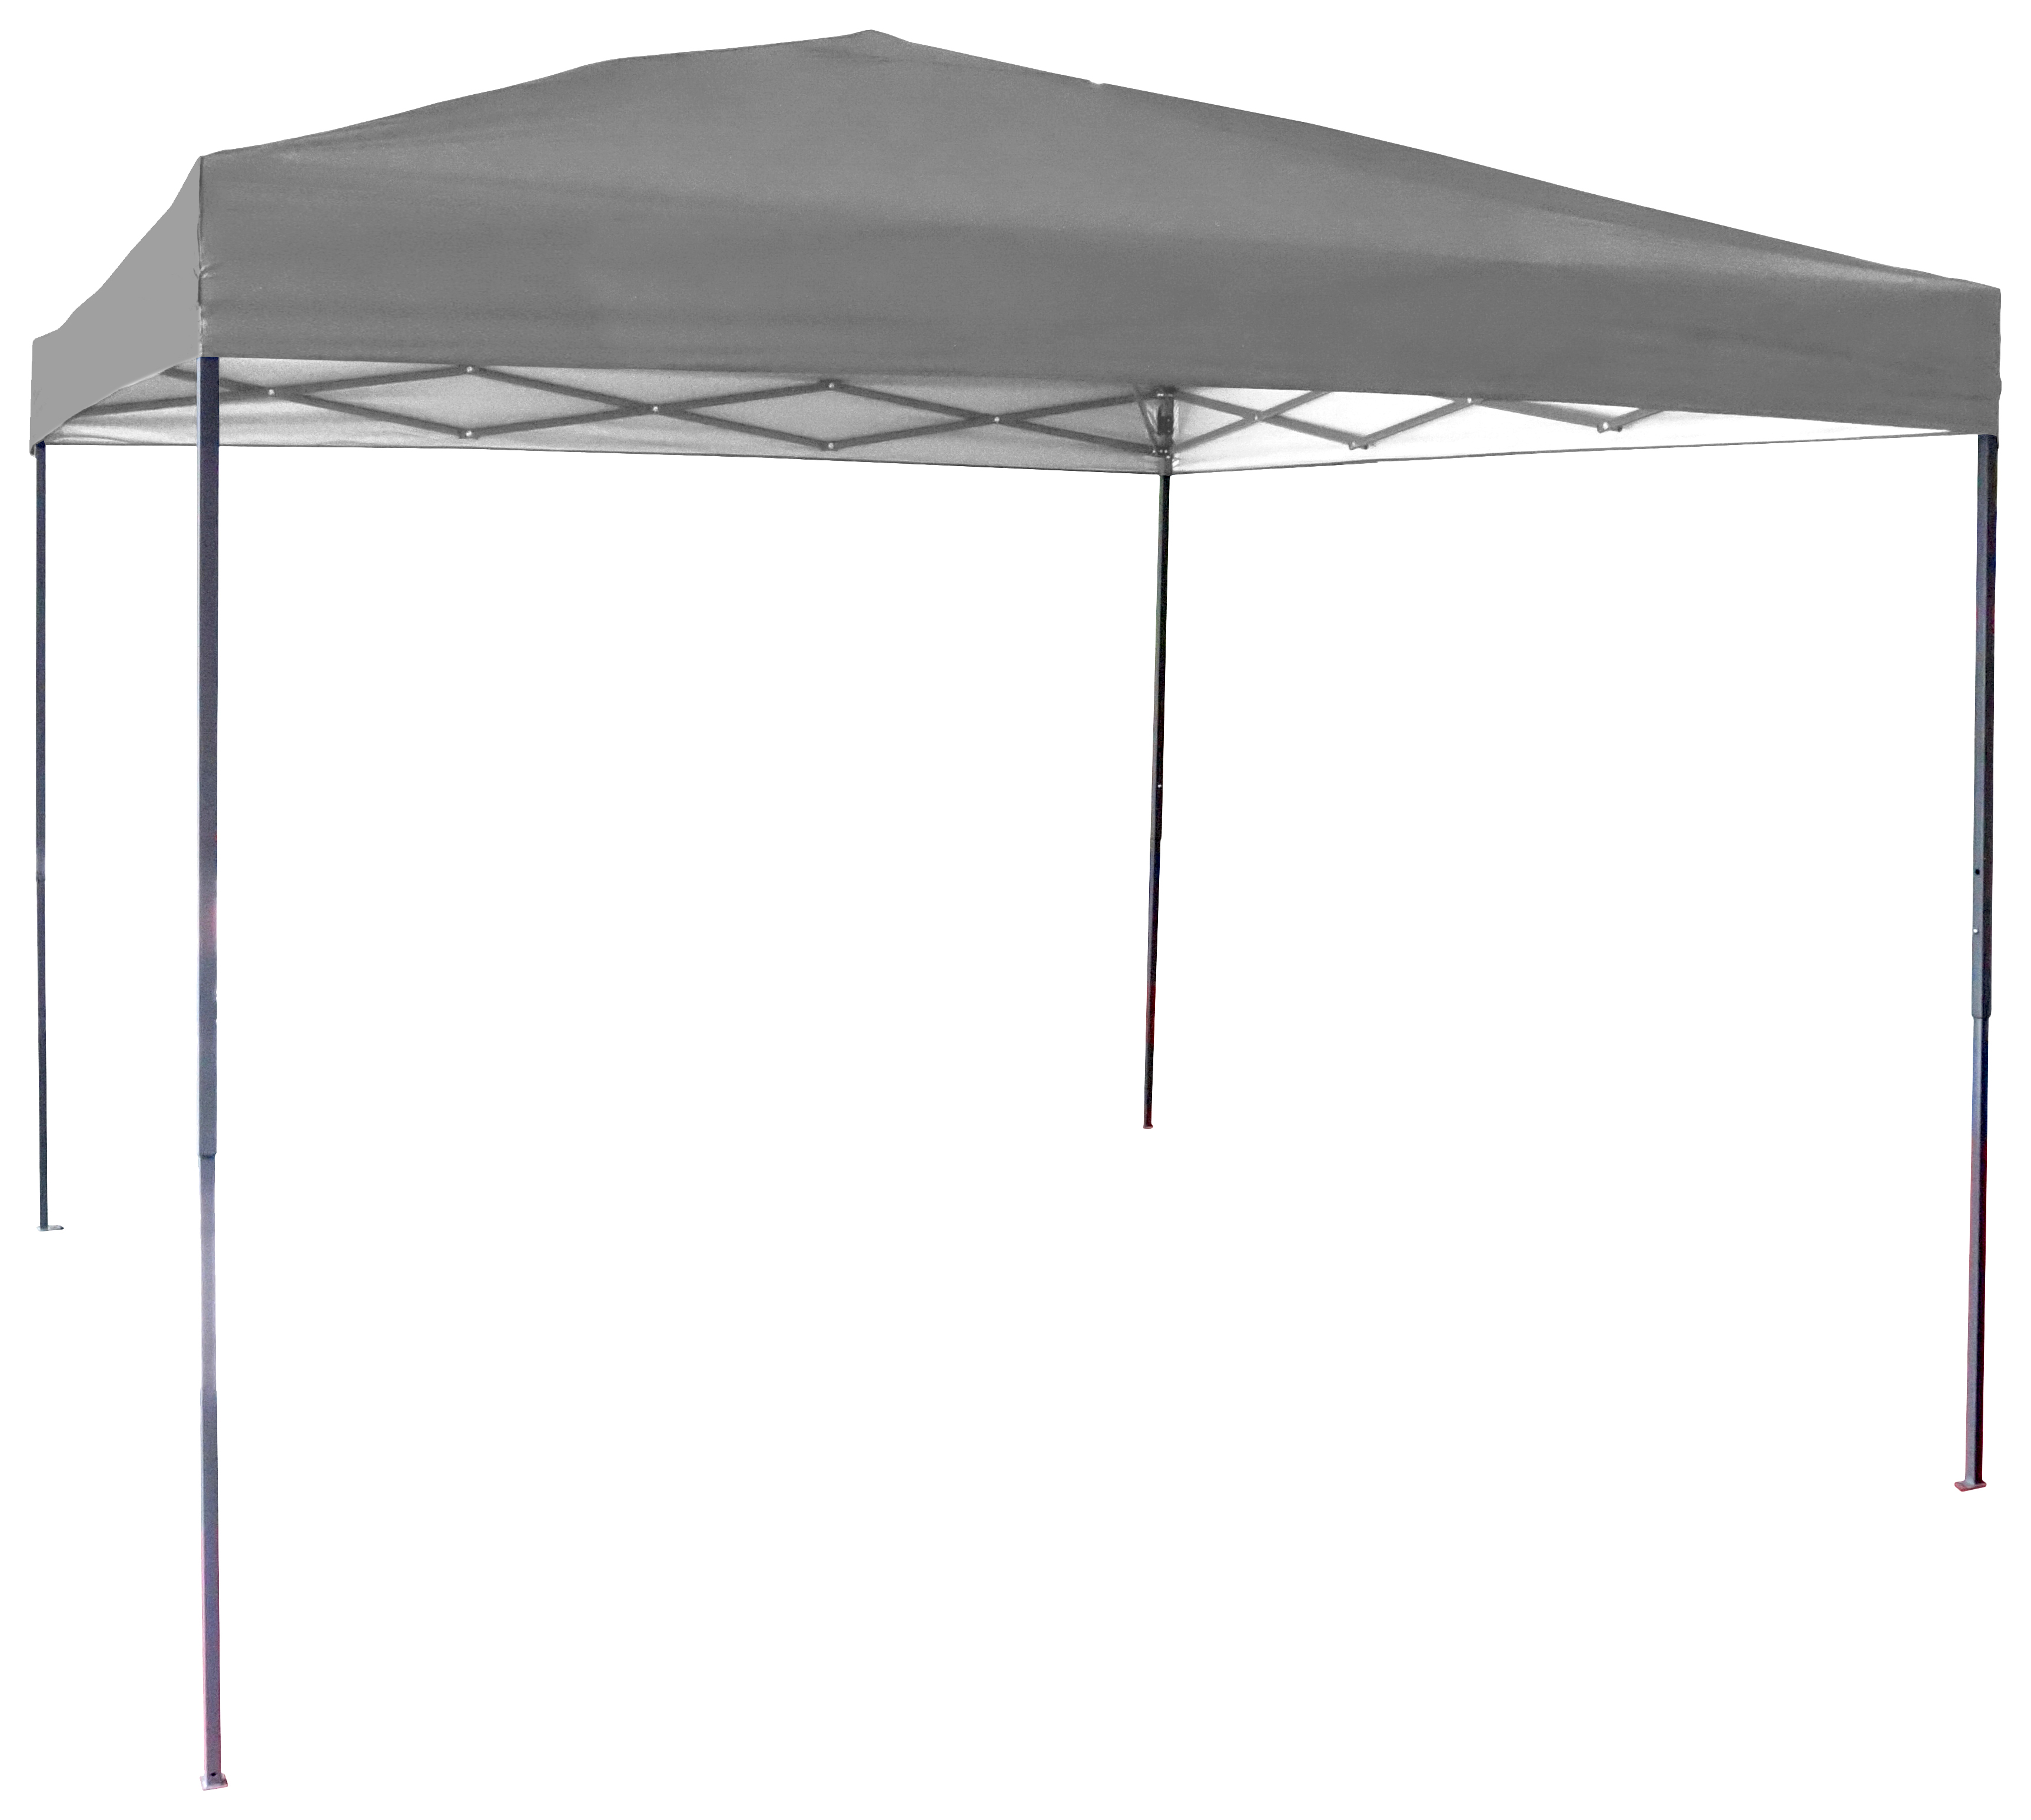 Image of One-touch Pop Up Gazebo 3 x 3m